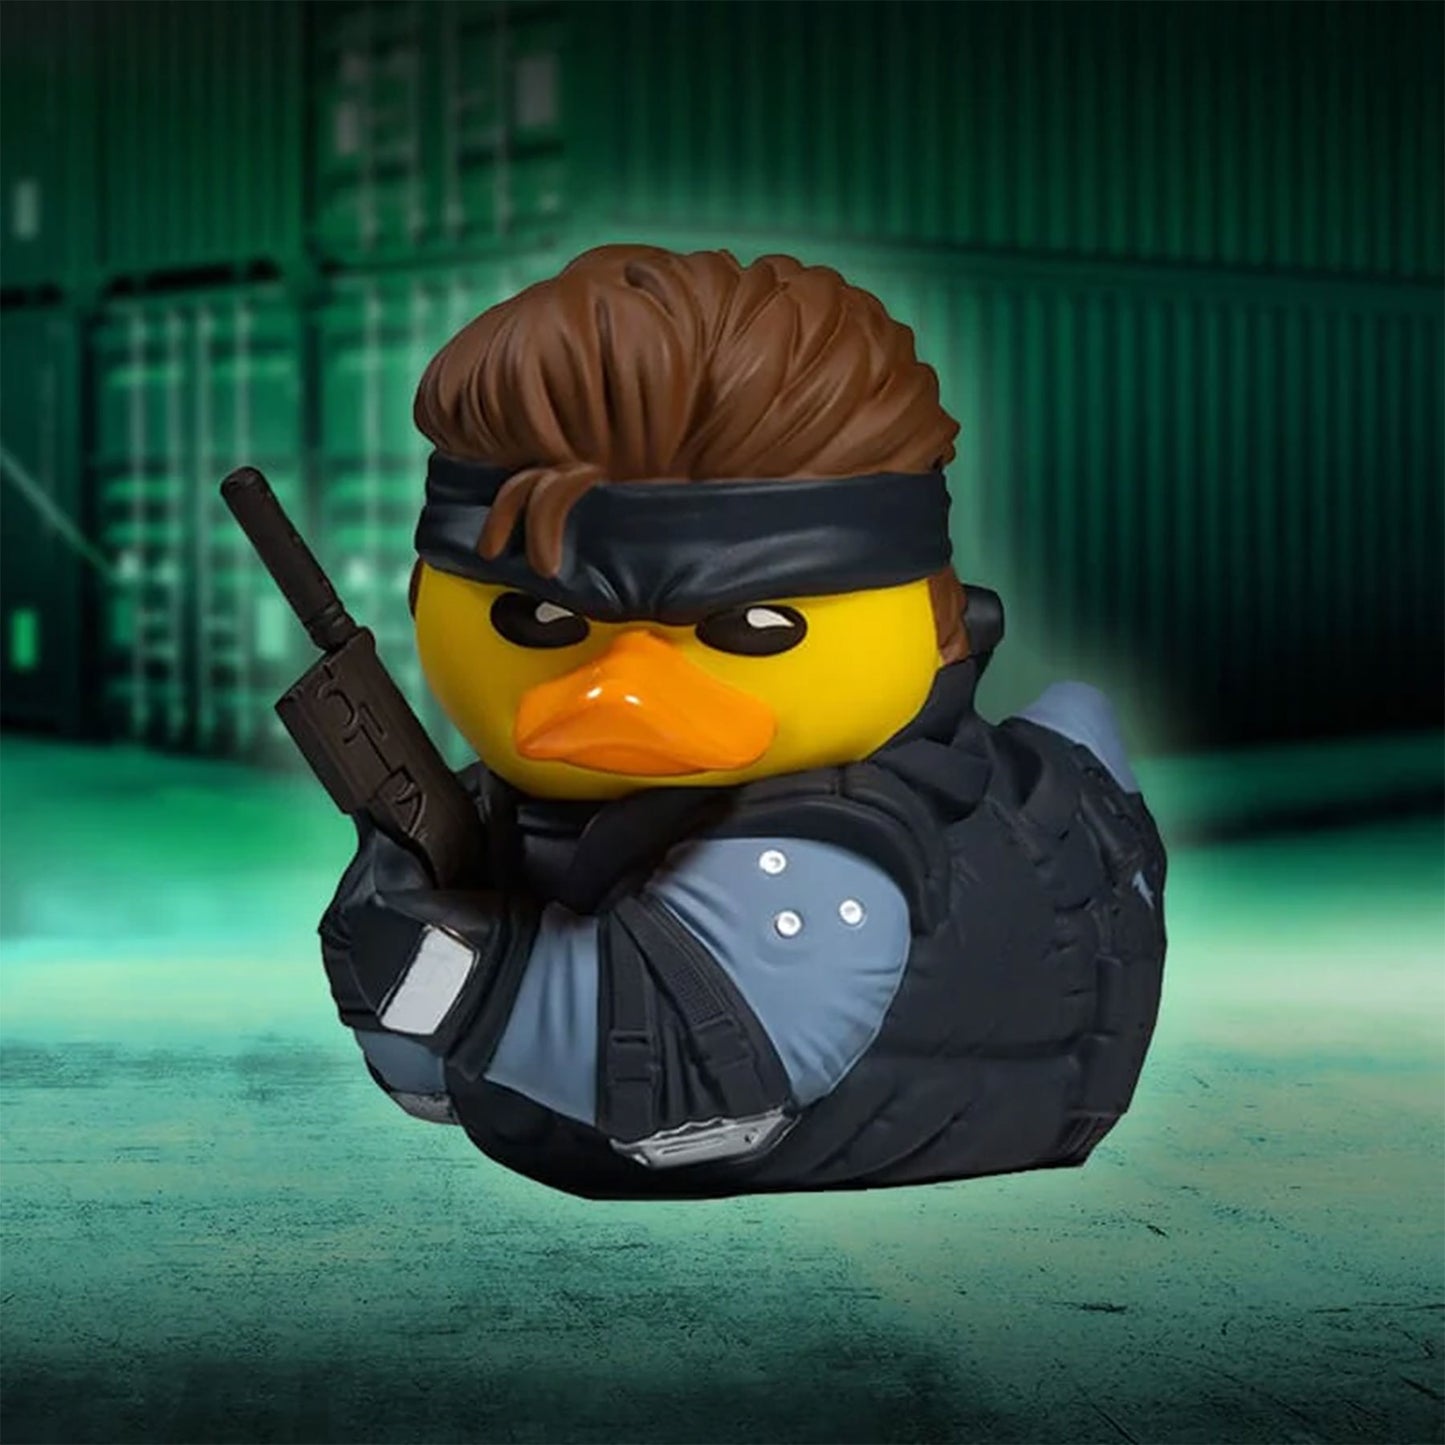 TUBBZ Metal Gear Solid Snake Rubber Duck (Boxed Edition)